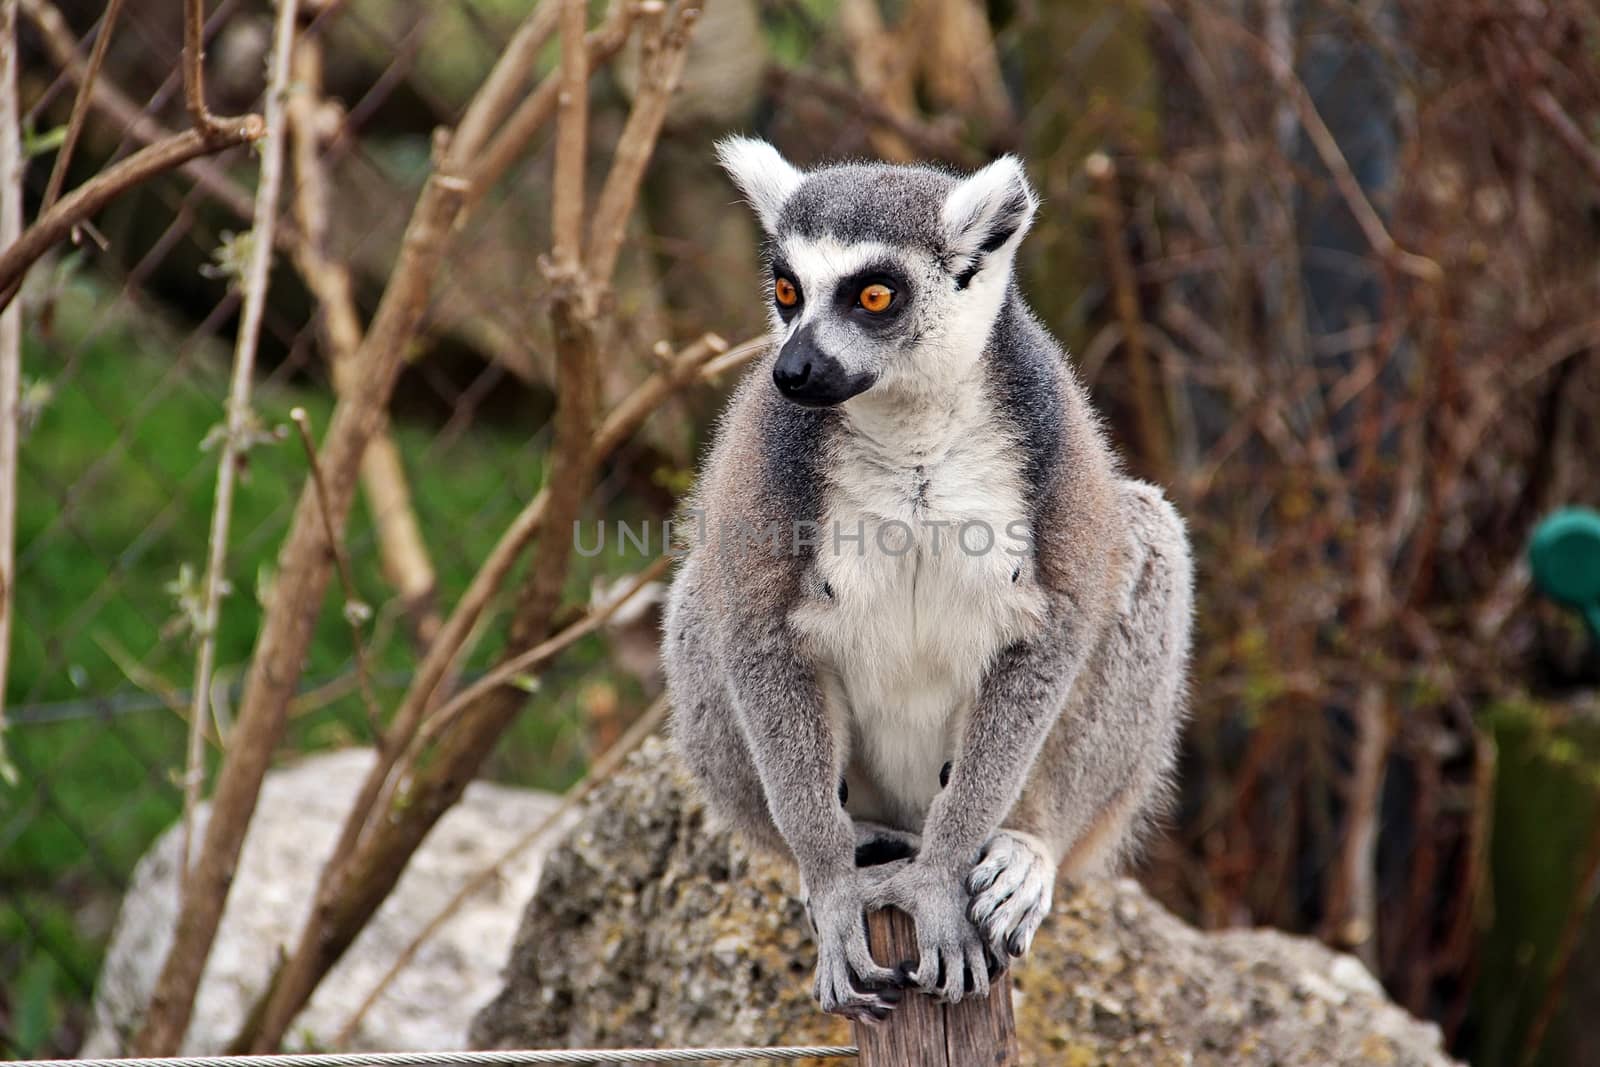 Ring-tailed lemur was greeting people out of his cage at Salzburg zoo